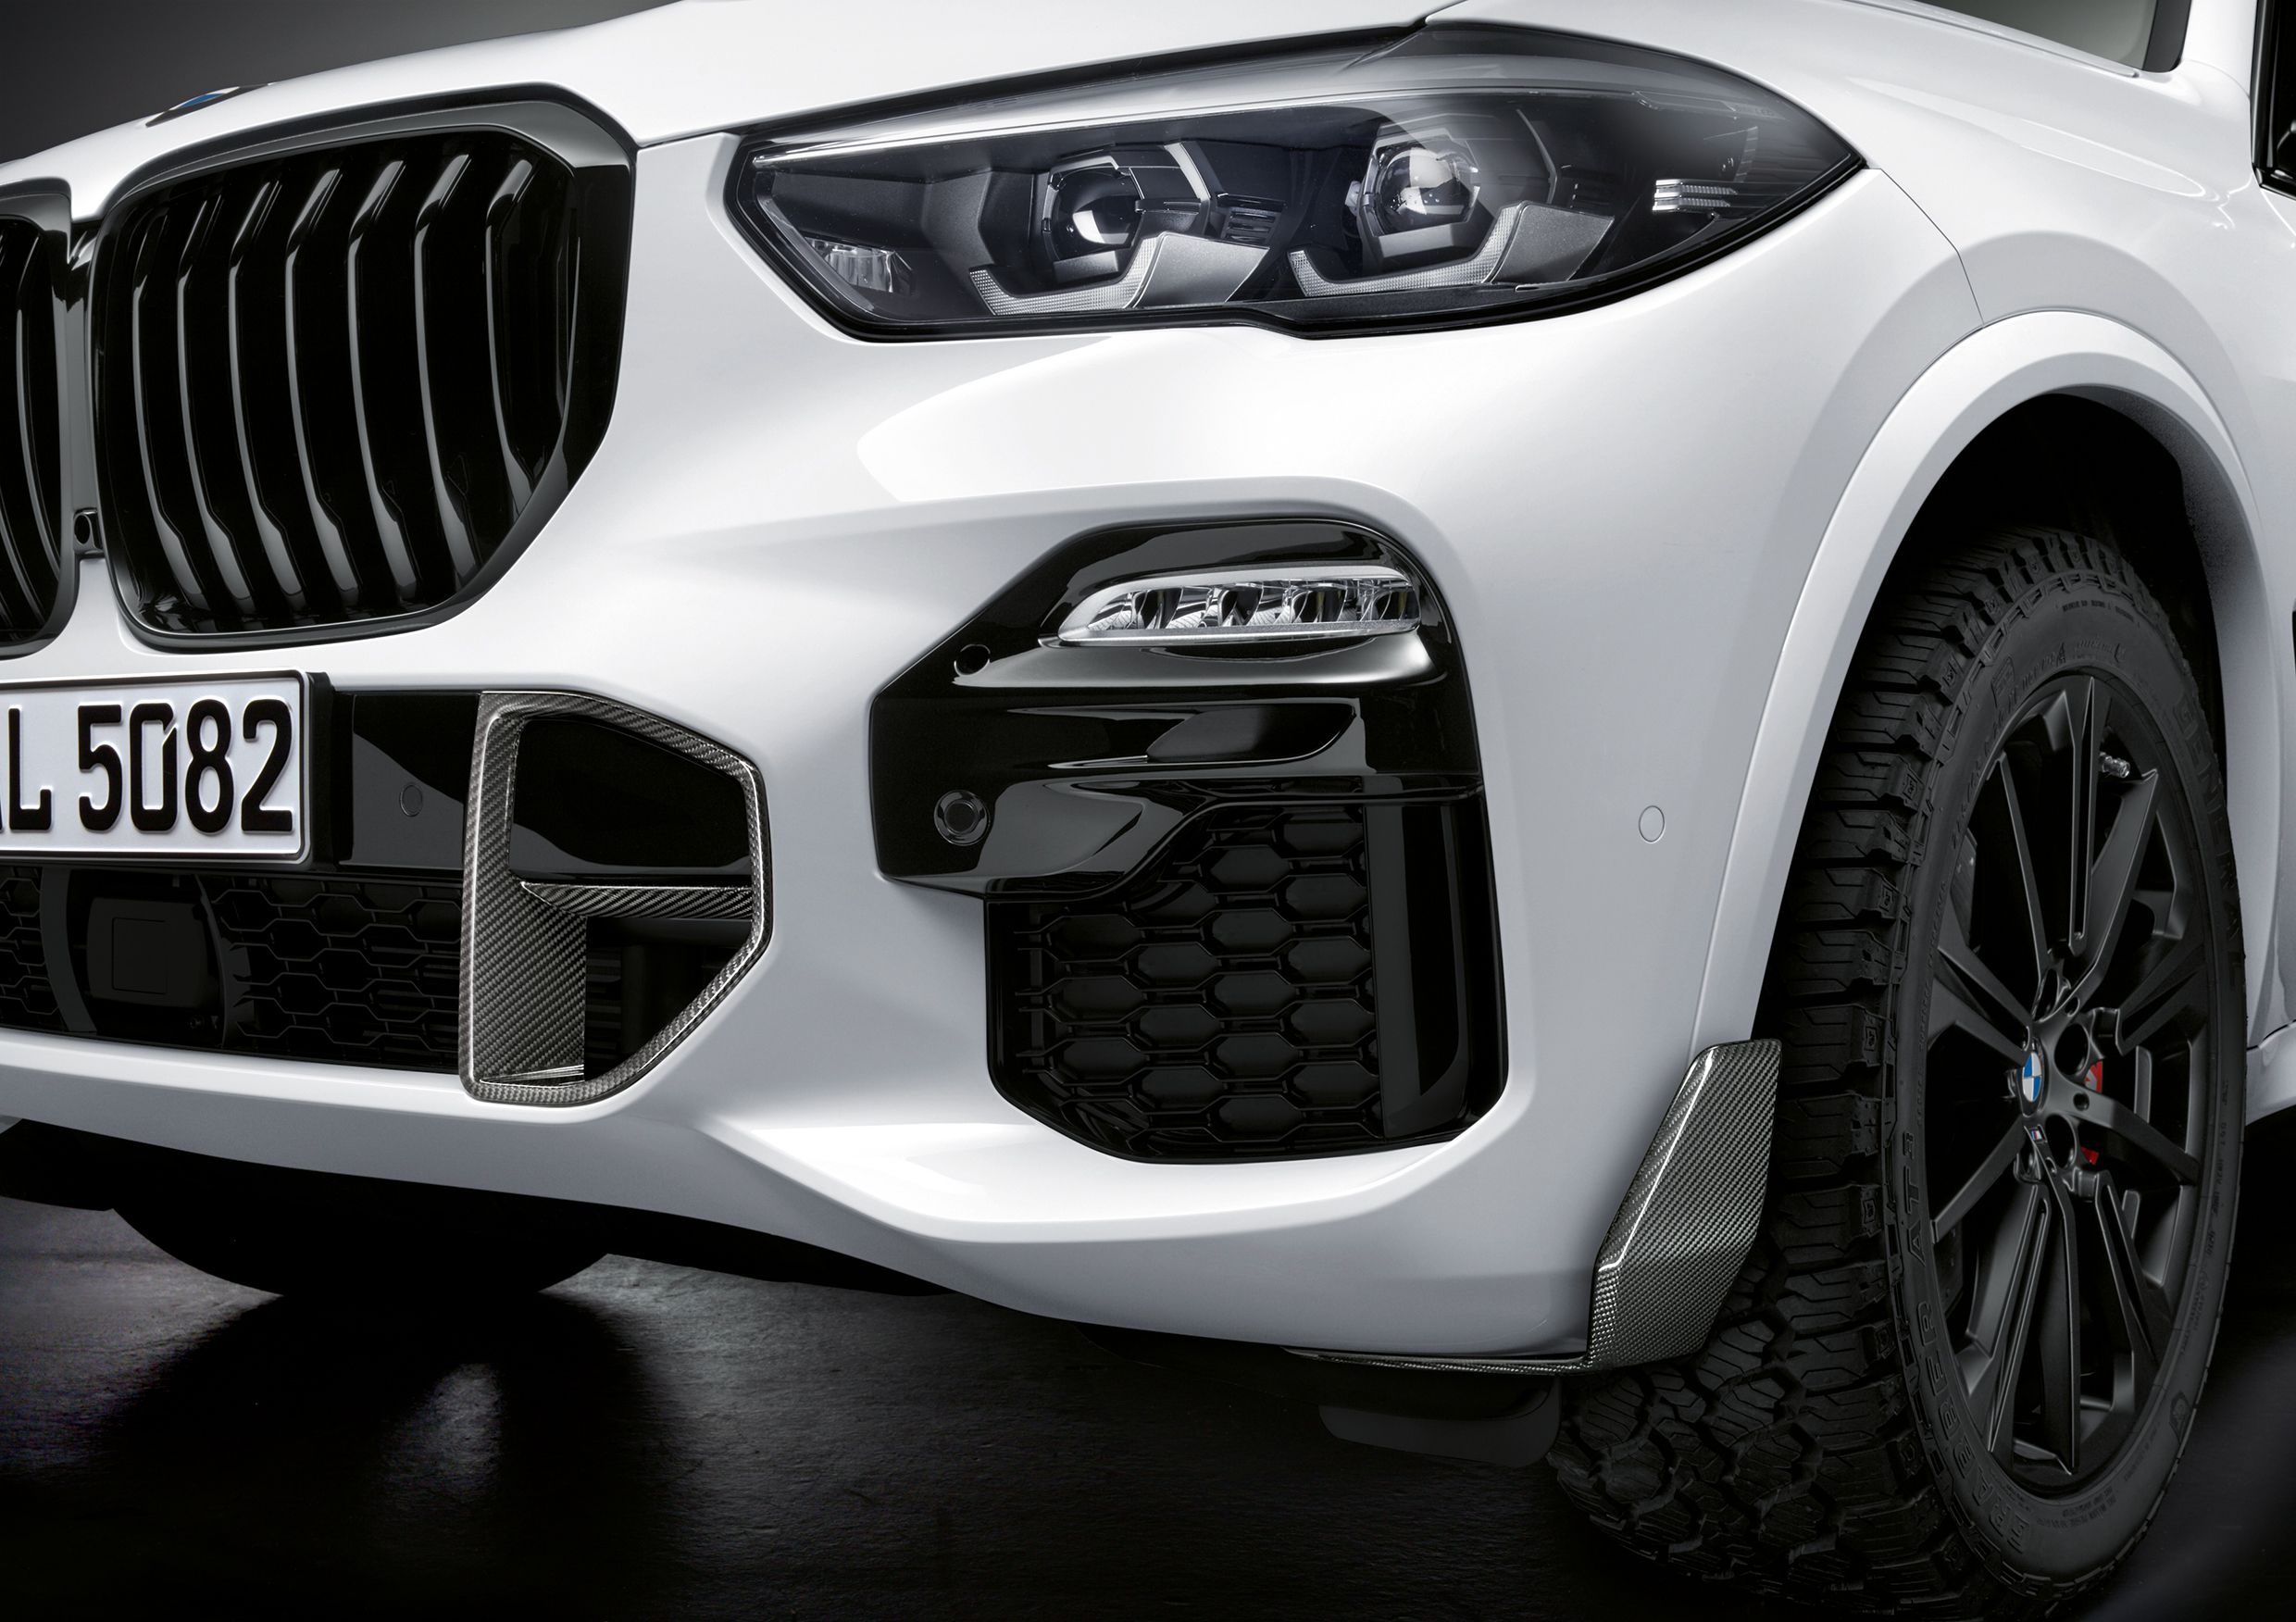 2019 BMW X5 with M Performance Parts